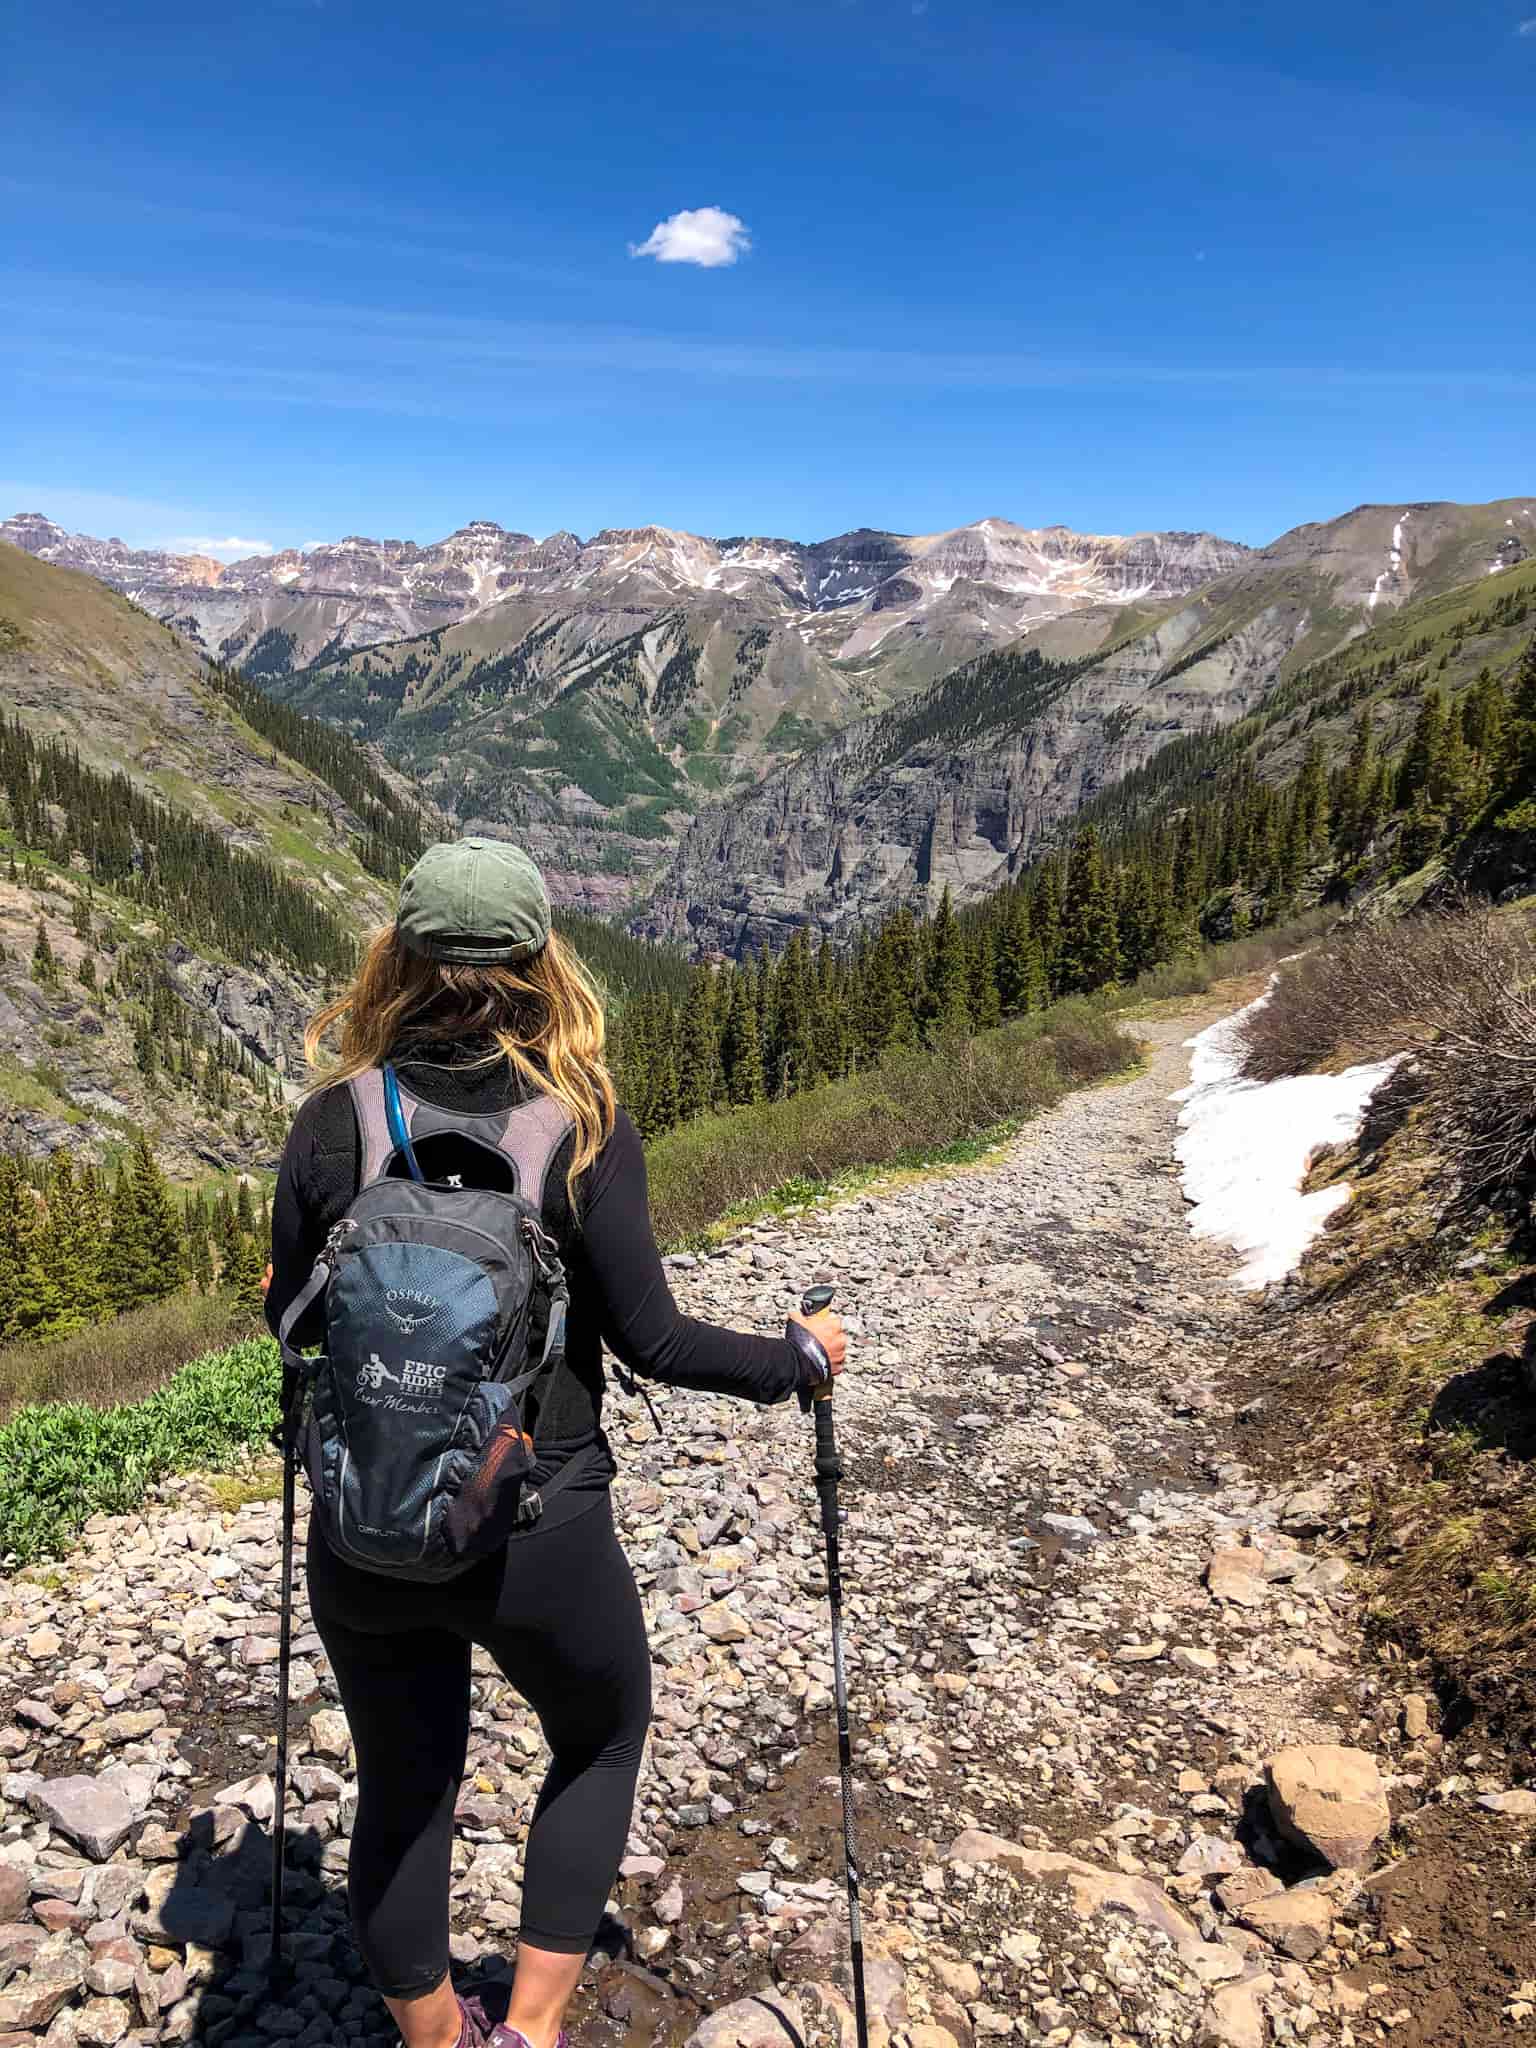 Woman wearing a backpack and carrying hiking poles stands on a rocky trail with mountains in the distance while hiking in Telluride, Colorado.